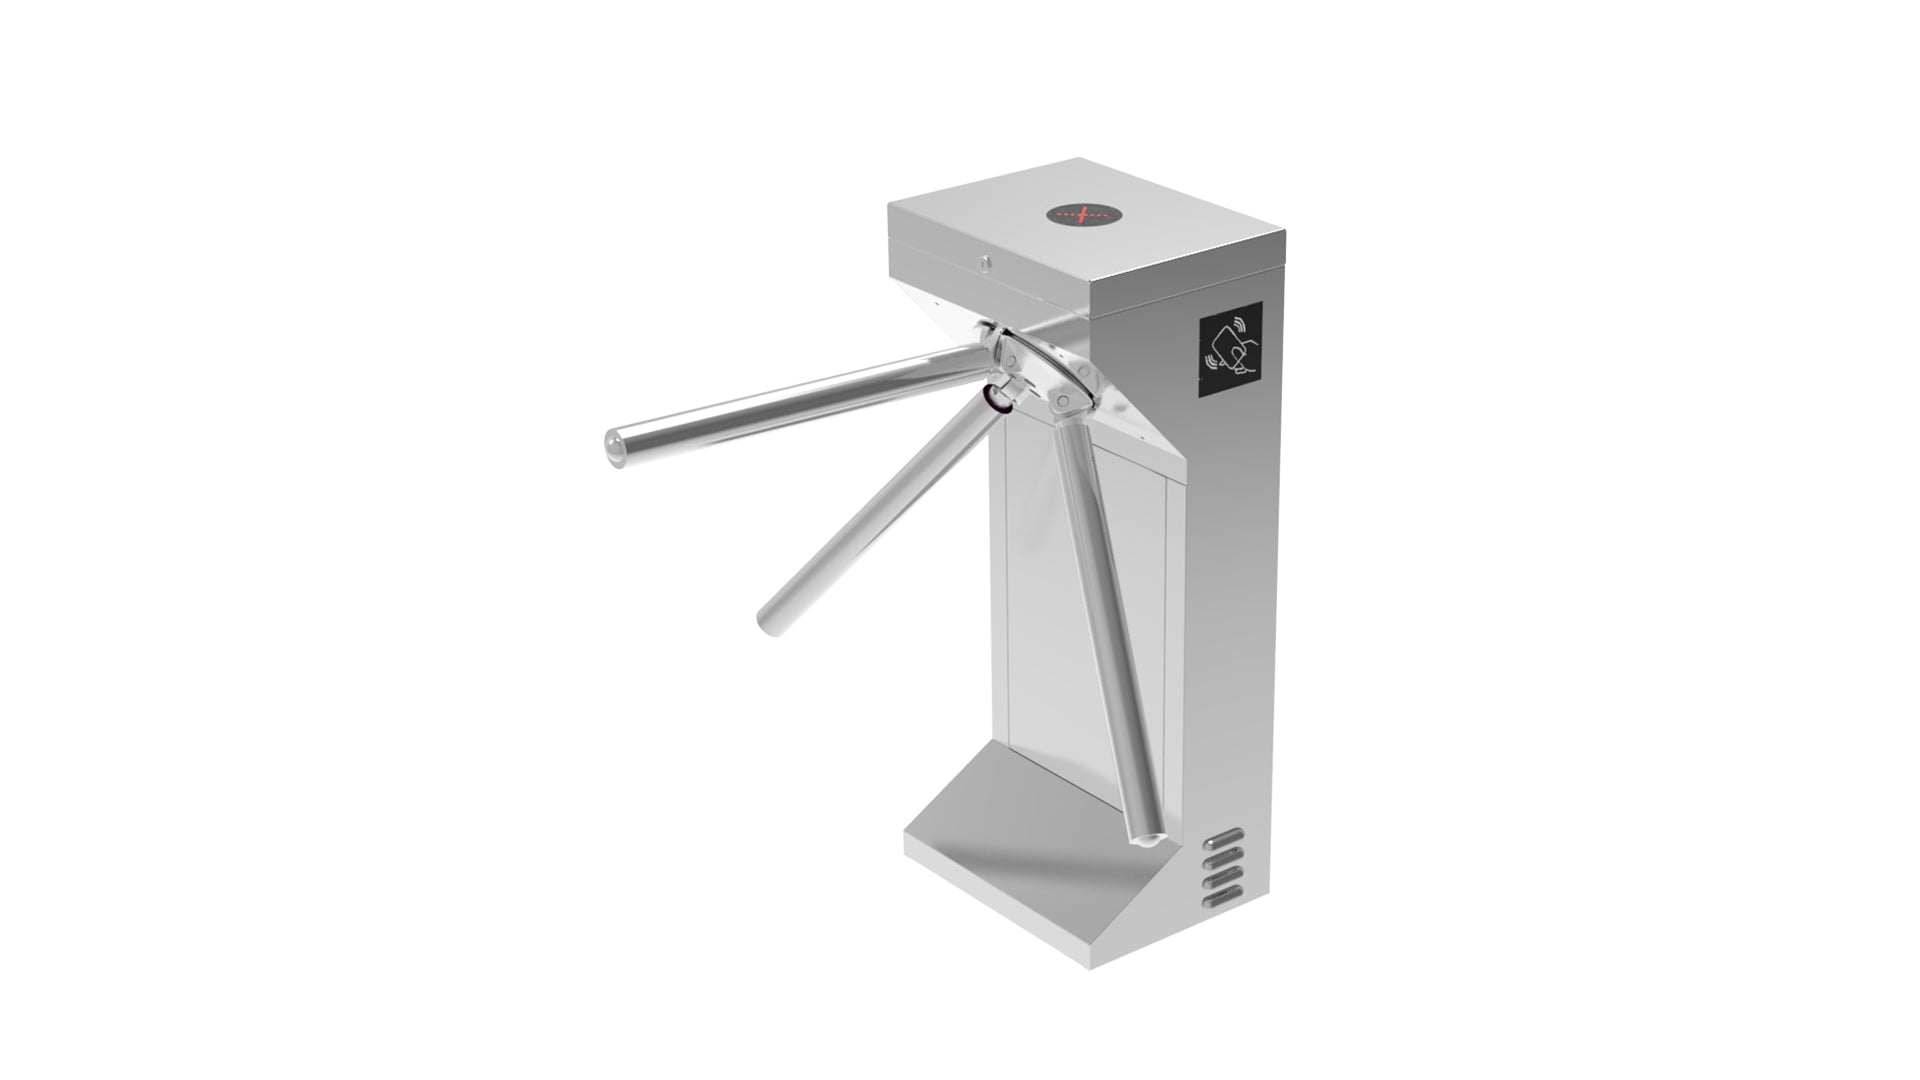 Security Semi-automatic Flap Turnstile with Access Control: HC-FLA-3M20